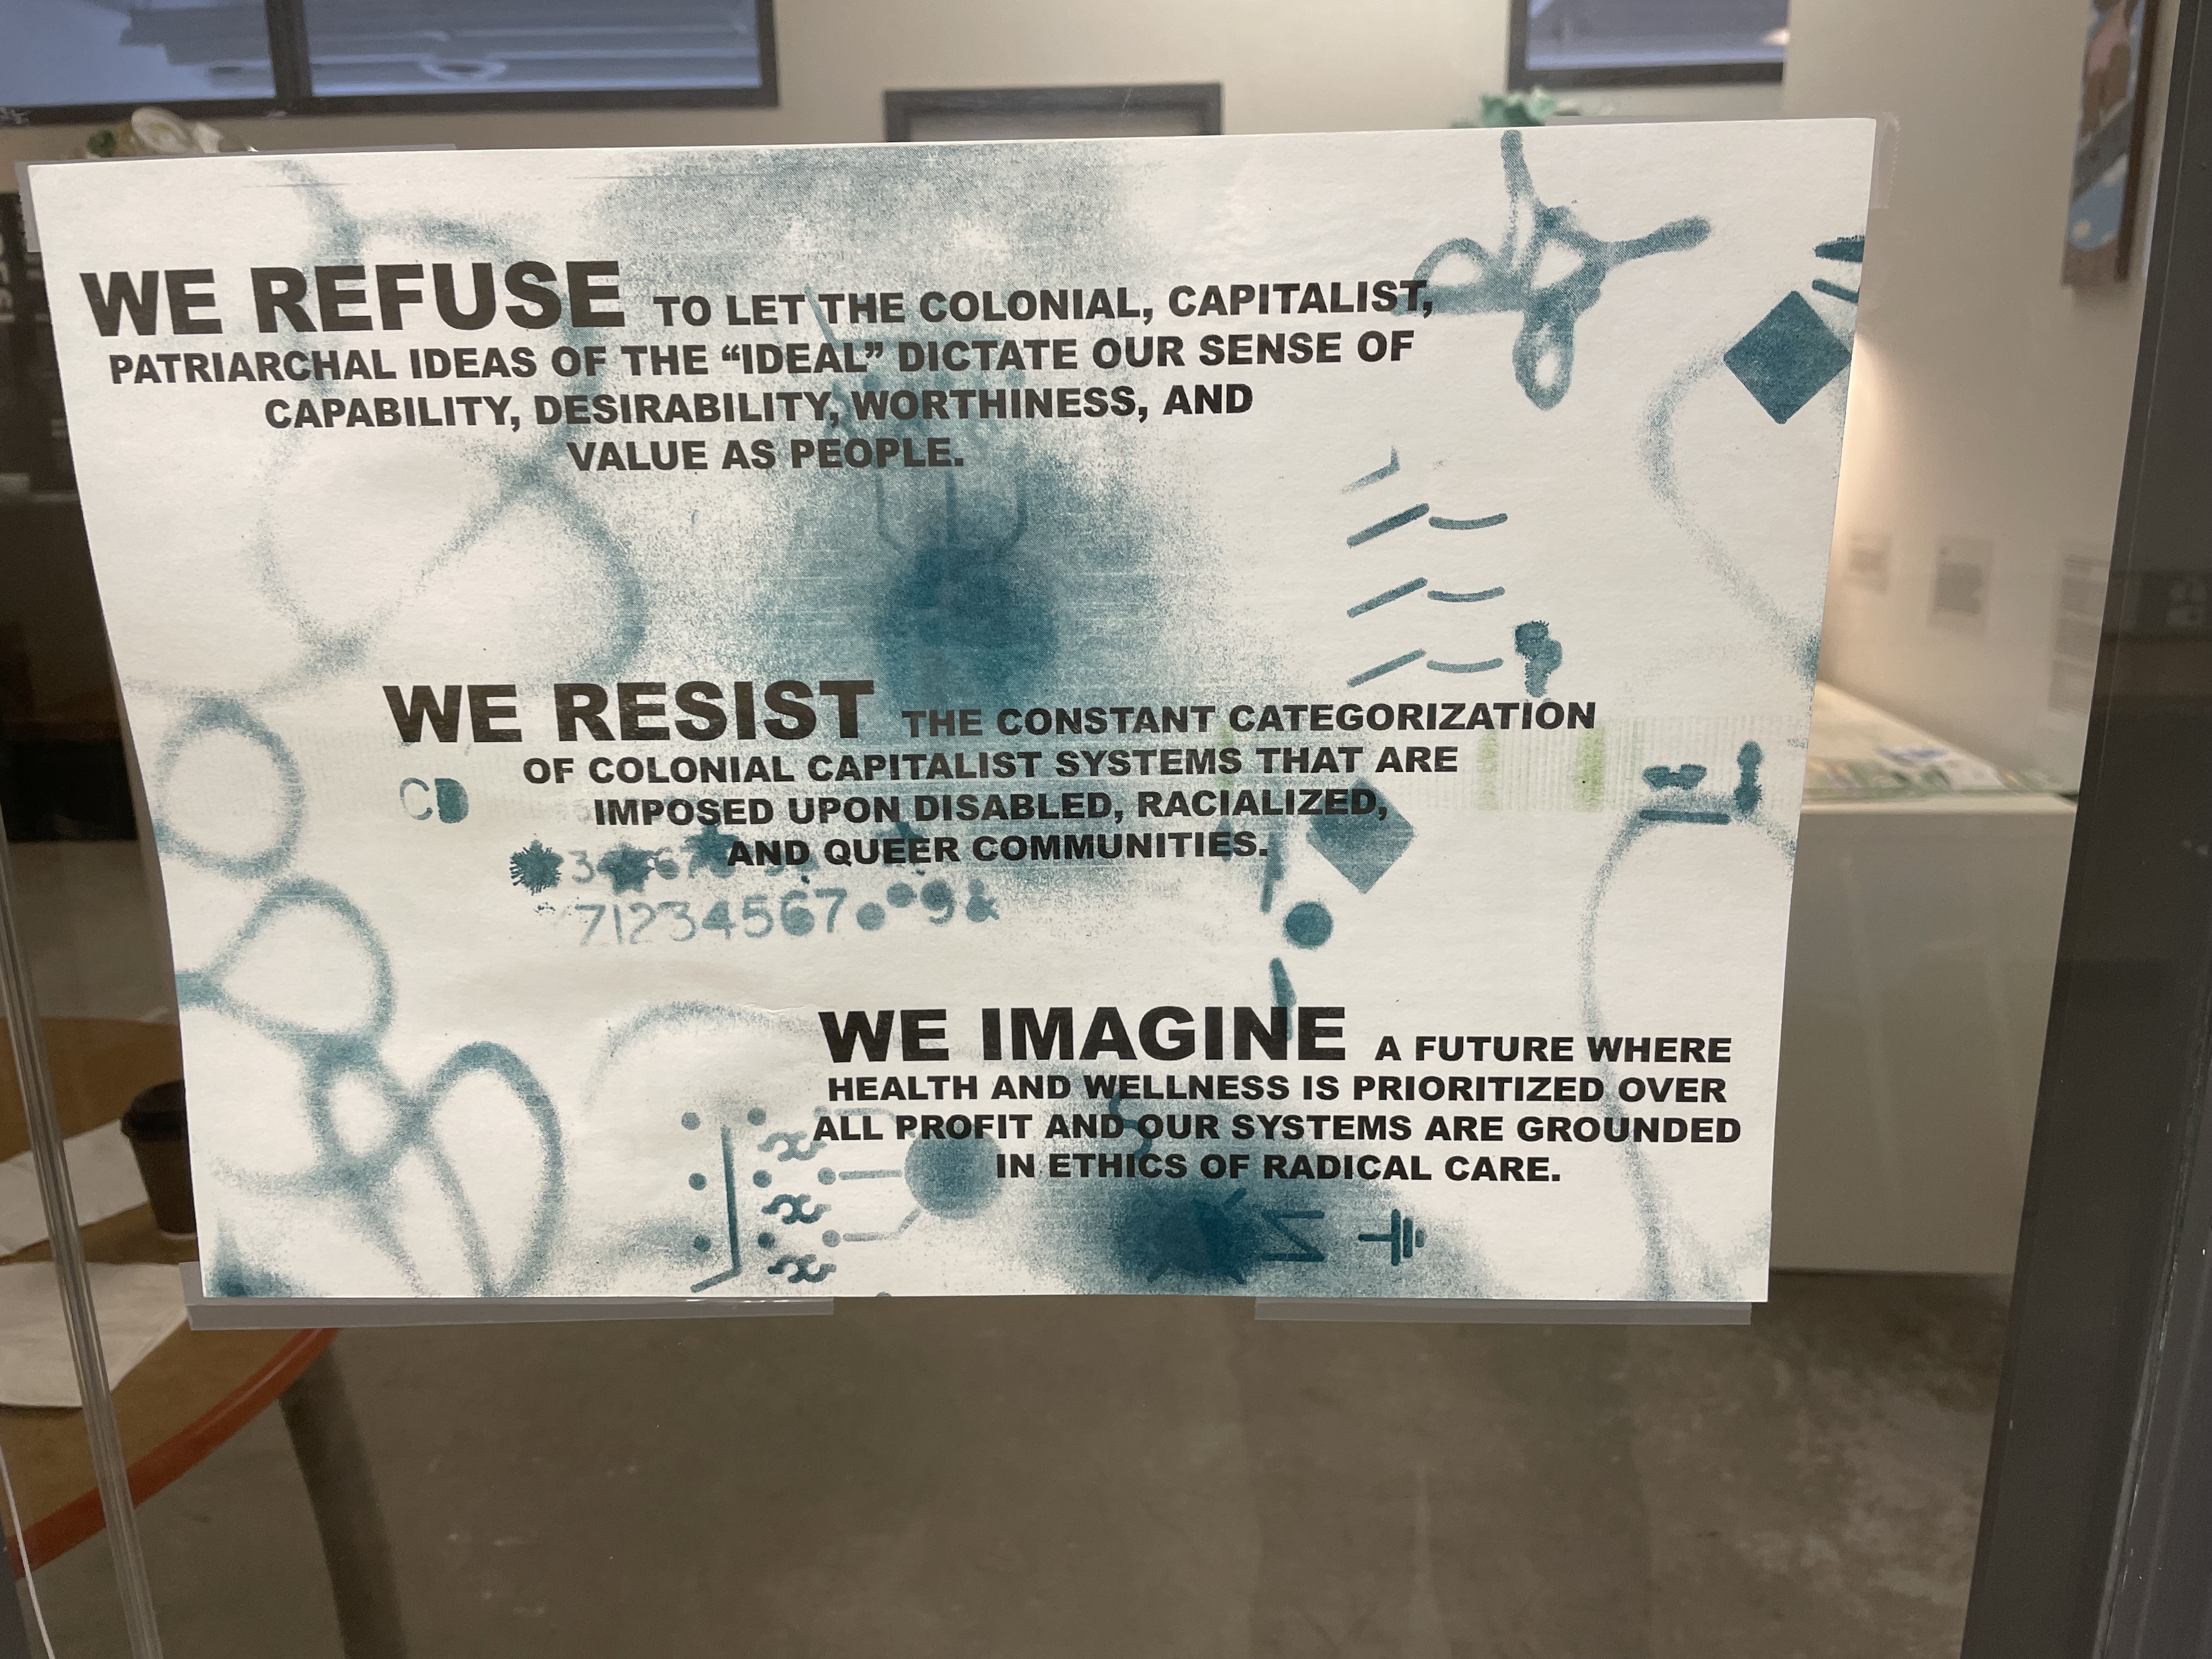 Poster with cream coloured background and blue-green designs and symbols with 3 text blocks.  Text reads:   WE REFUSE to let the colonial, capitalist, patriarchal ideas of the “ideal” dictate our sense of capability, desirability, worthiness, and value as people.  WE RESIST the constant categorization of colonial capitalist systems that are imposed upon disabled, racialized, and queer communities.  WE IMAGINE a future where health and wellness is prioritized over all profit and our systems are grounded in ethics of radical care.